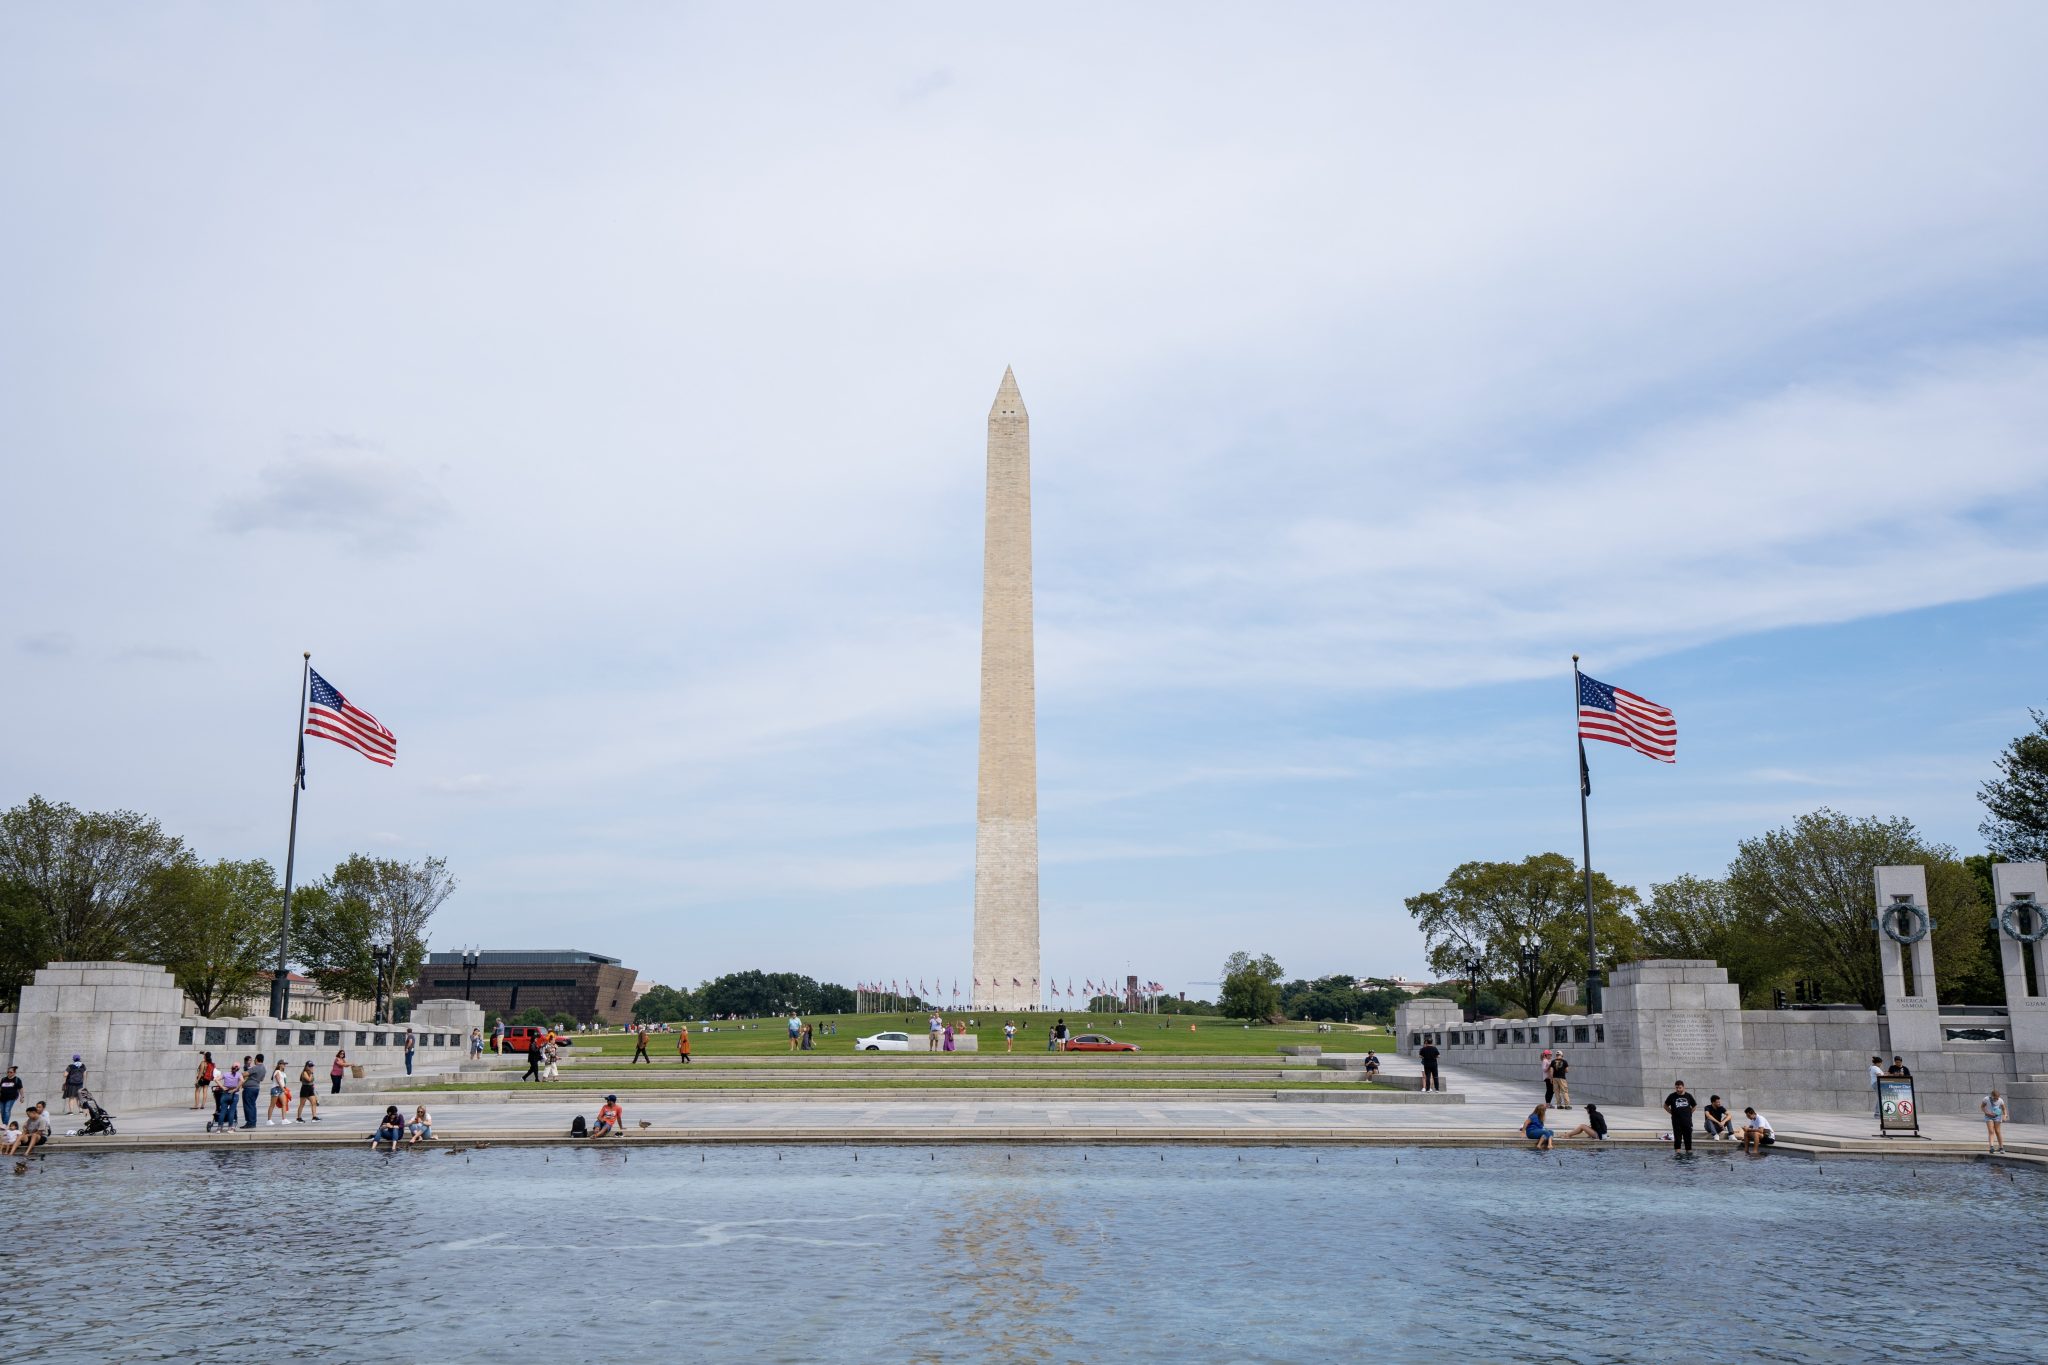 DISTRICT OF COLUMBIA CLICKS: PHOTOS OF THE CAPITAL